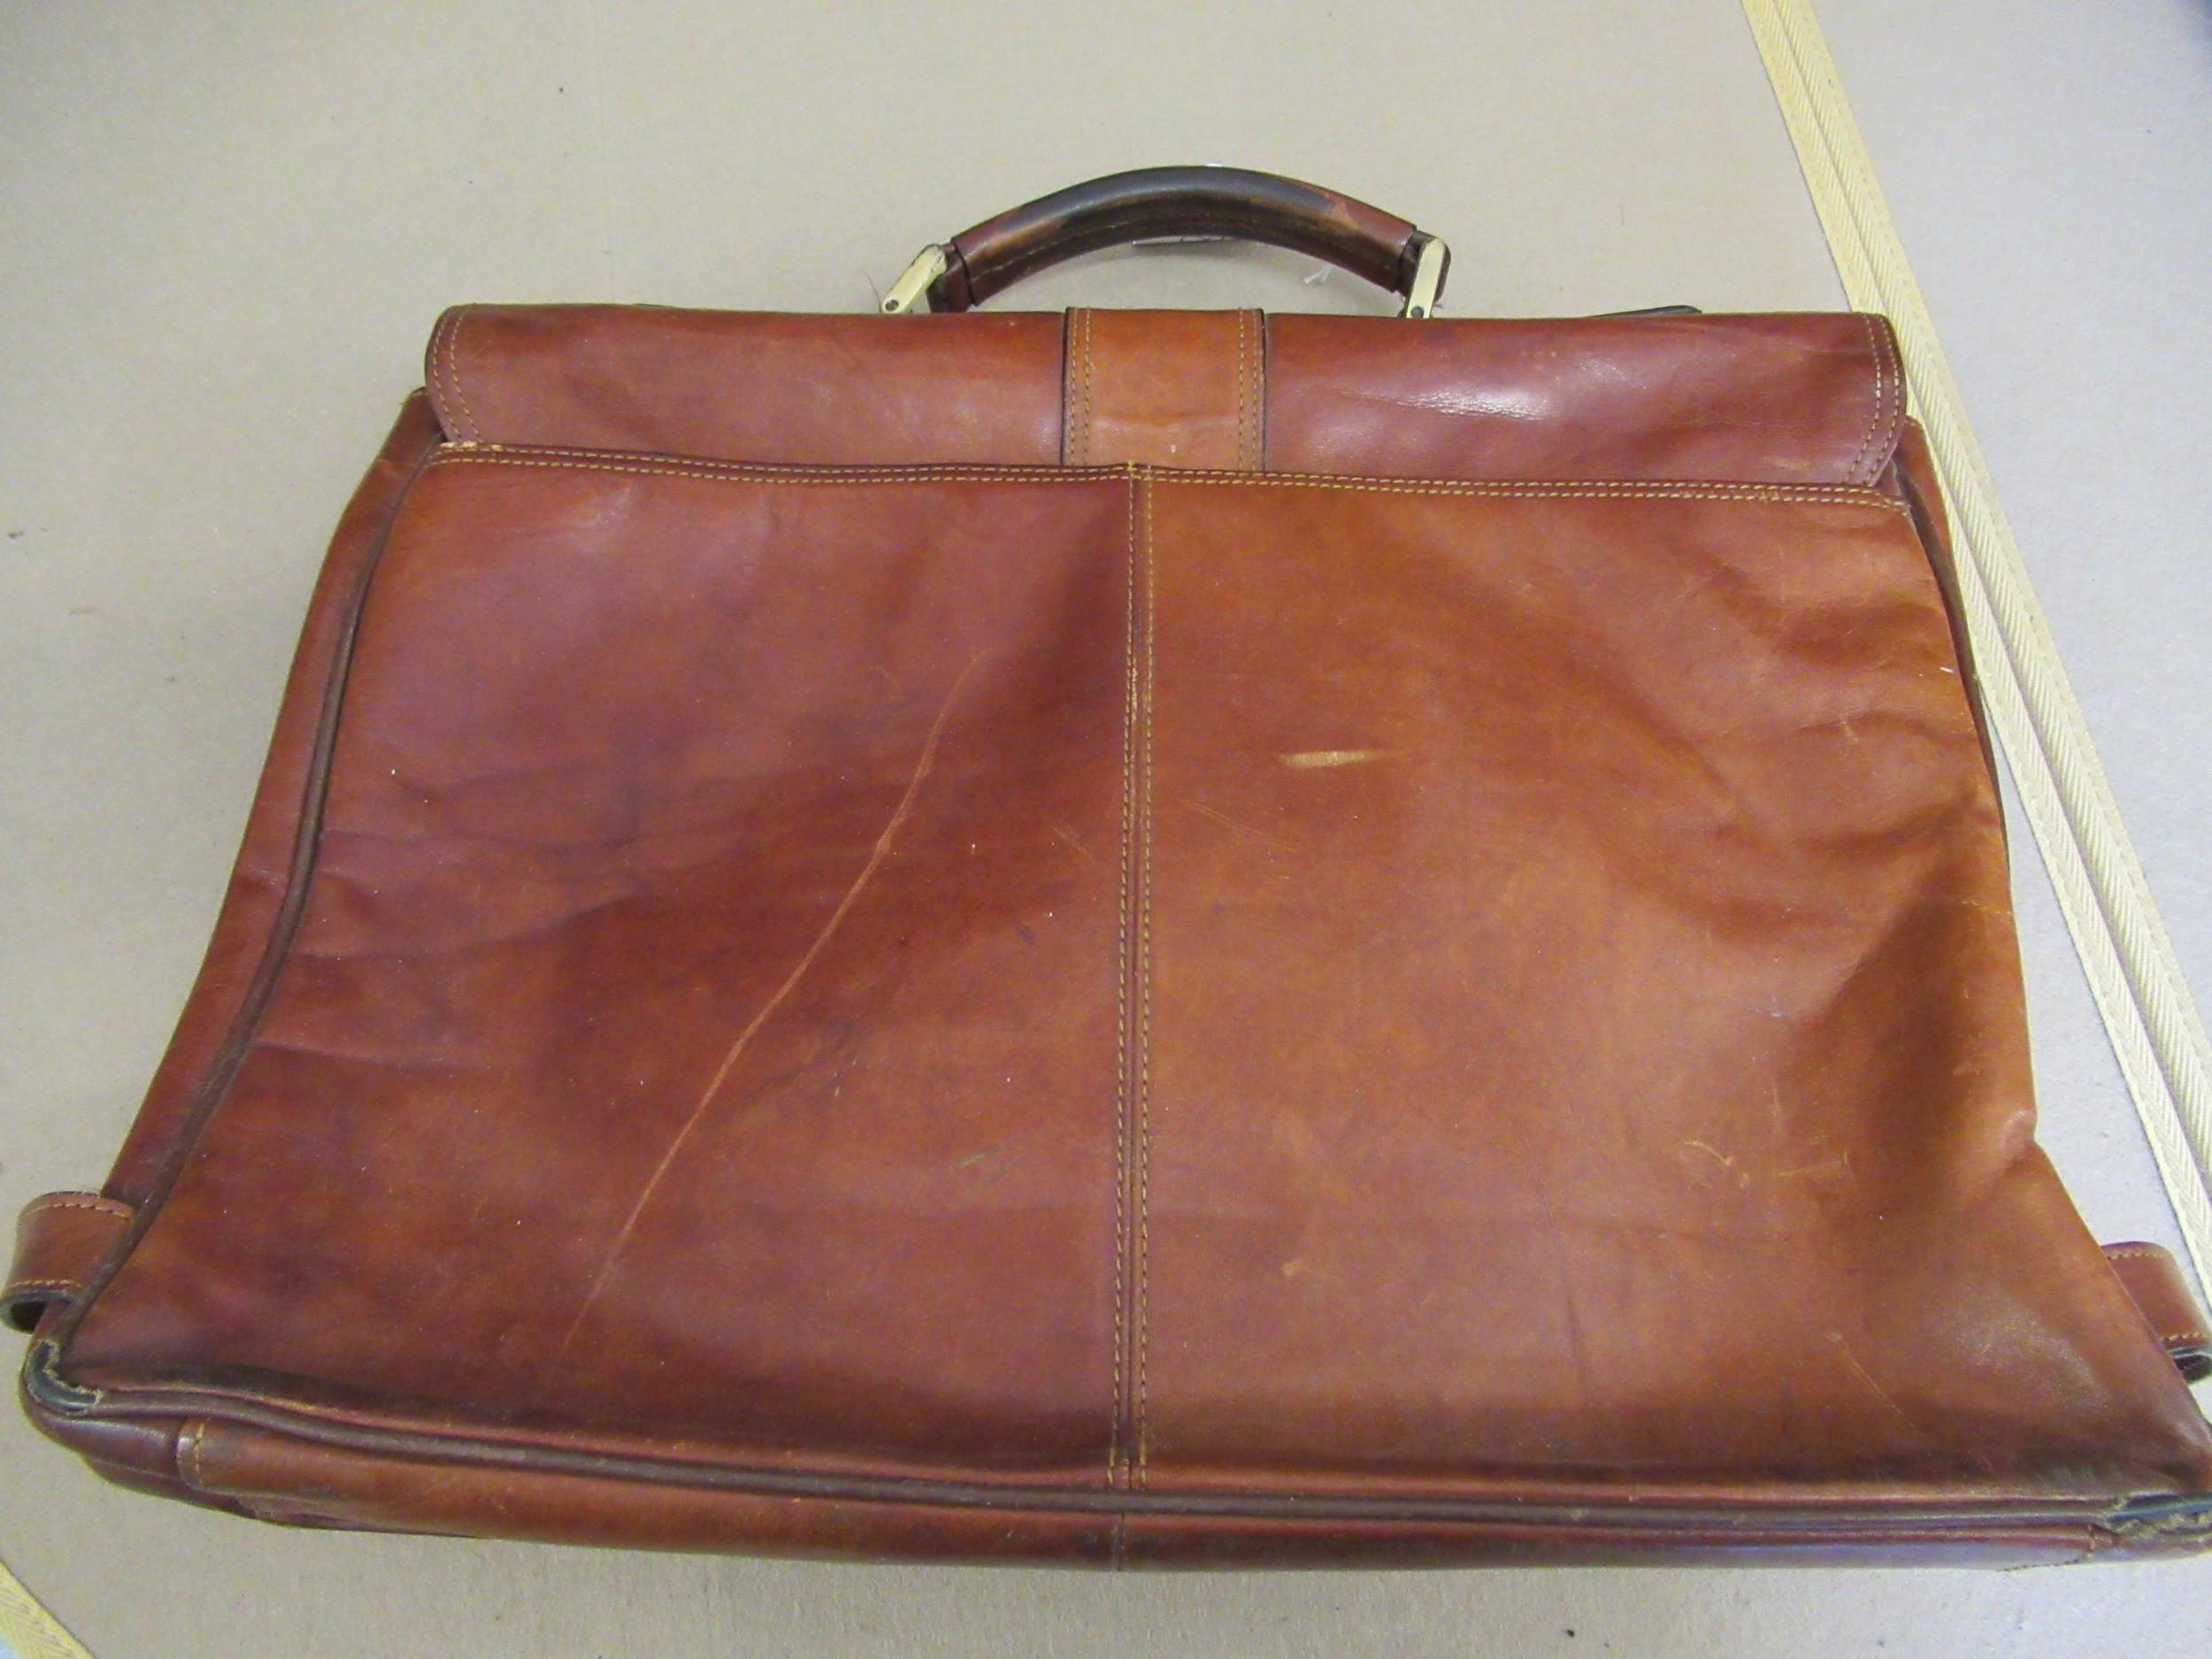 Tan leather attaché case by Piquadro, together with another leather briefcase Condition as shown - Image 5 of 17